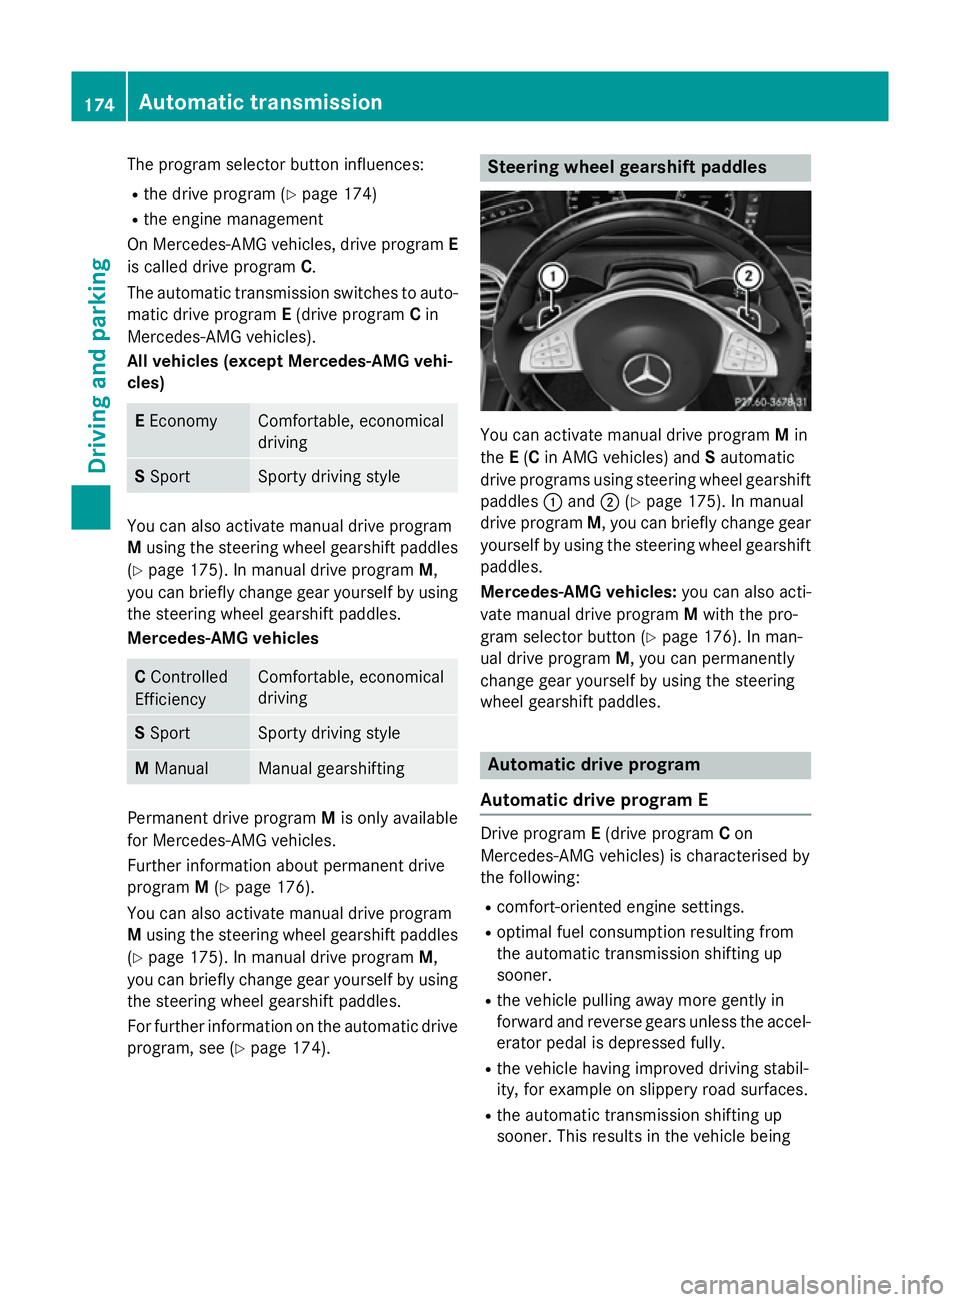 MERCEDES-BENZ S-CLASS COUPE 2015  Owners Manual The program selector button influences:
R the drive program (Y page 174)
R the engine management
On Mercedes-AMG vehicles, drive program E
is called drive program C.
The automatic transmission switche